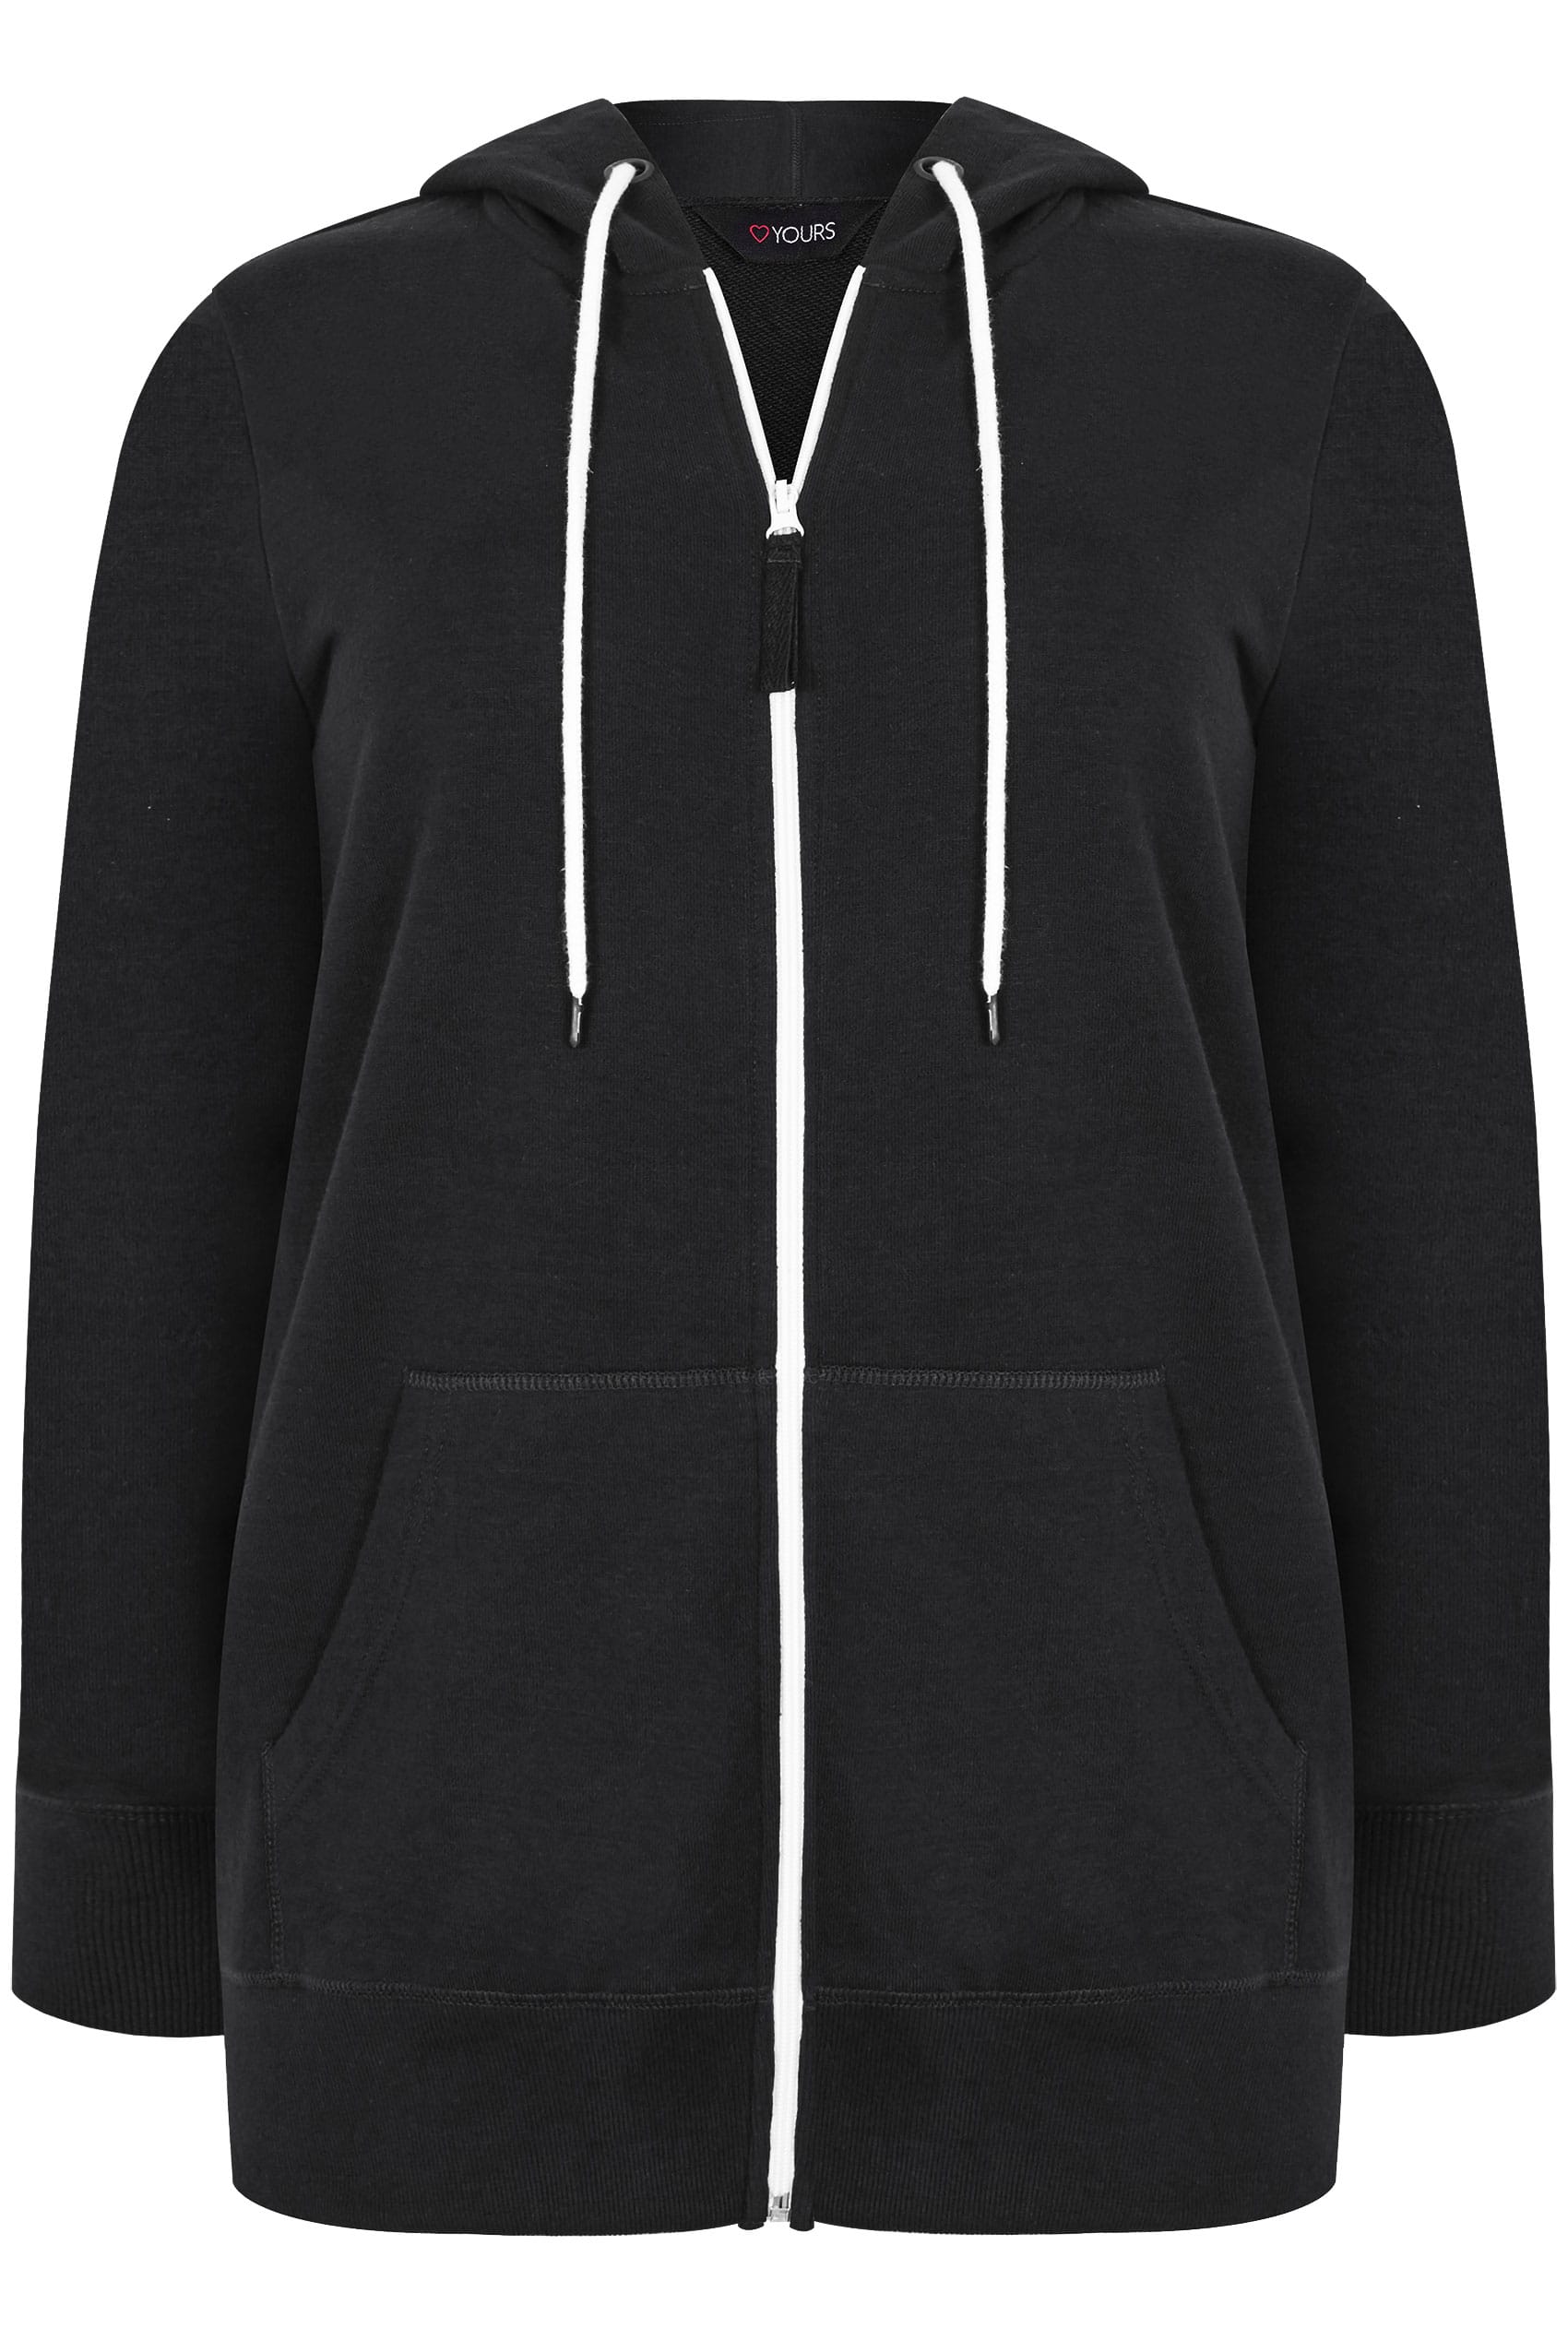 Black Zip Through Hoodie, plus size 16 to 36 | Yours Clothing